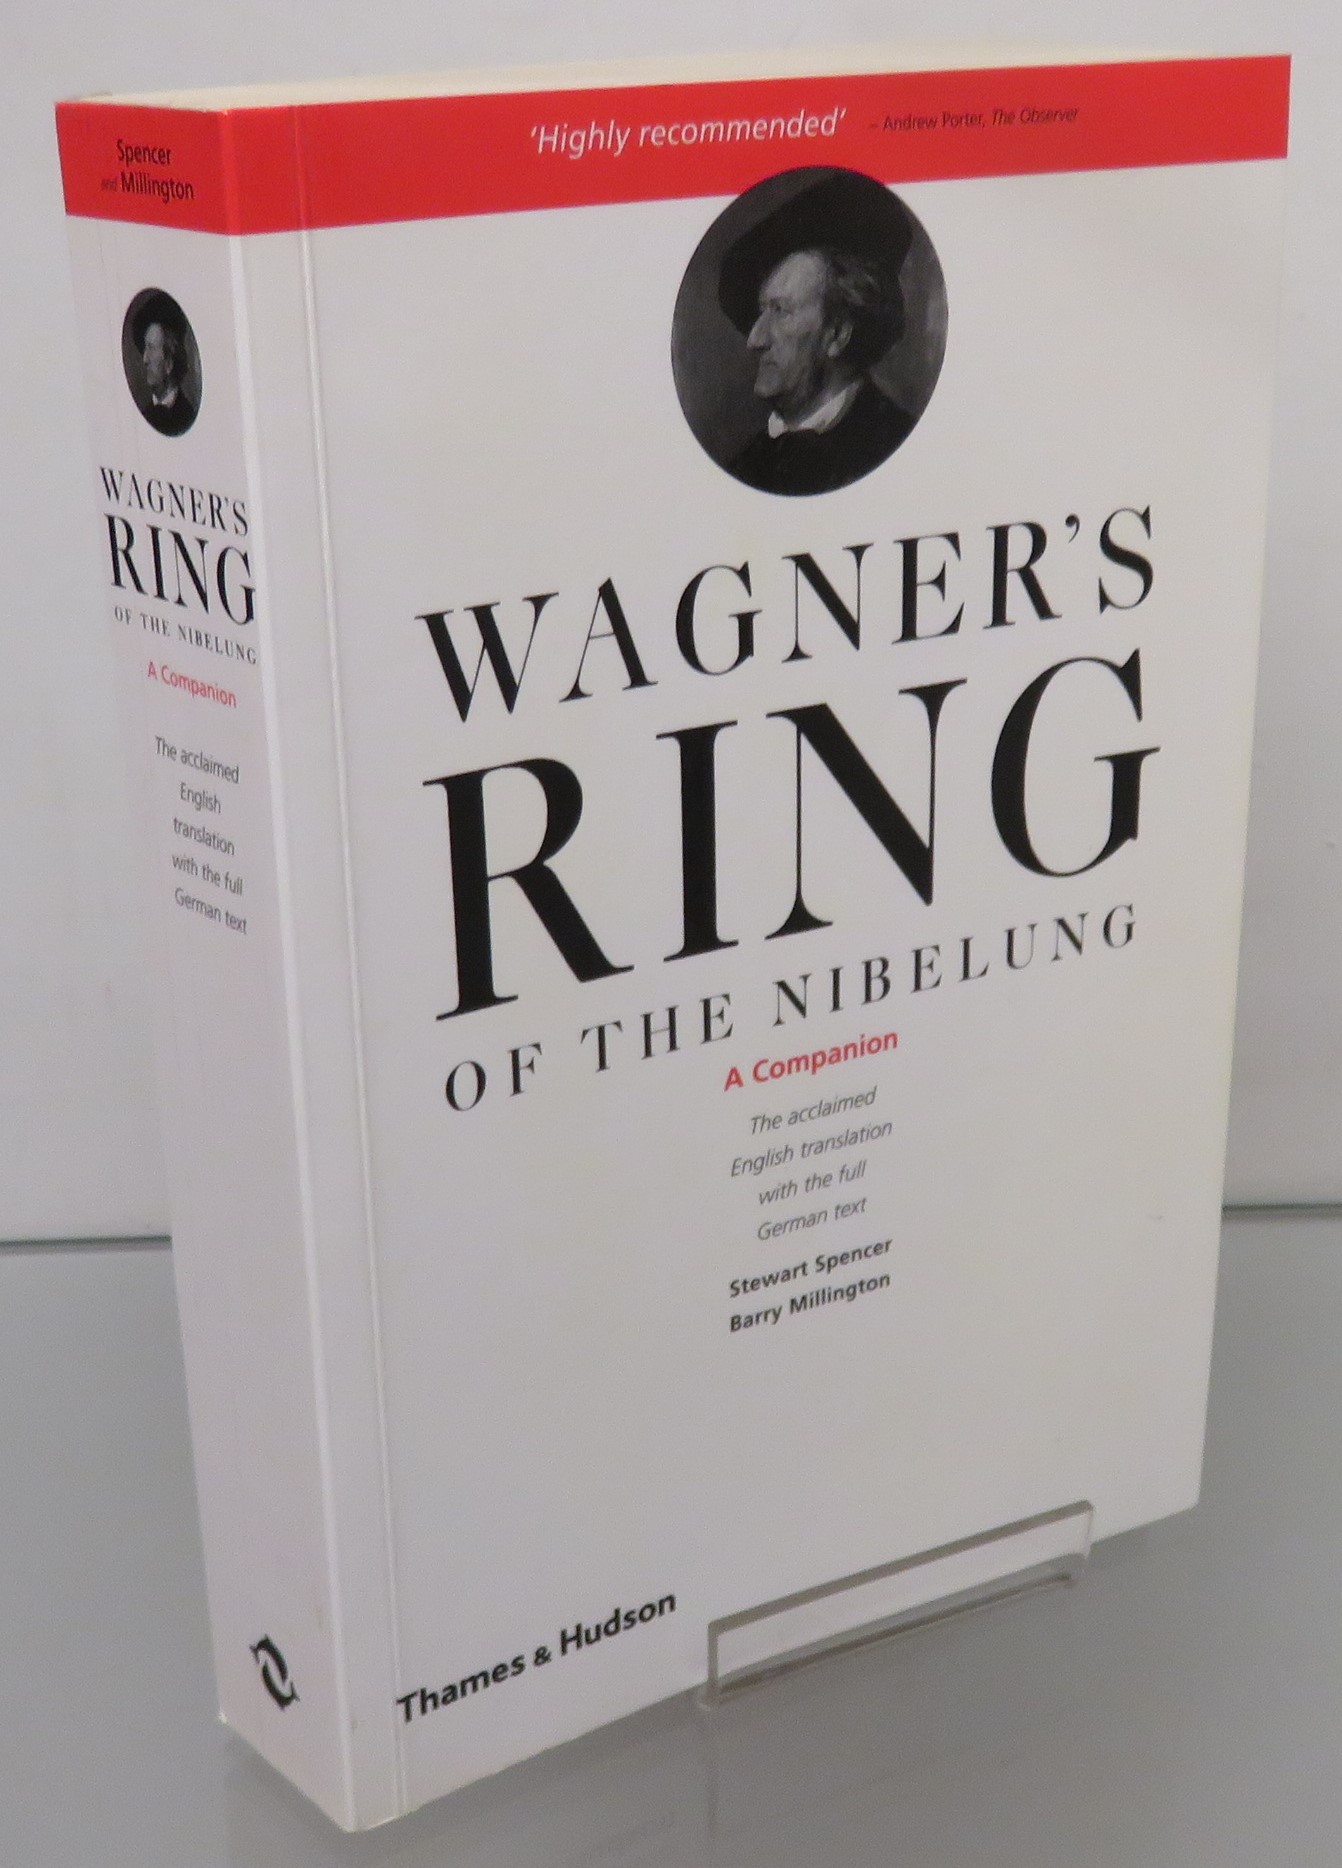 Wagner's Ring of the Nibelung